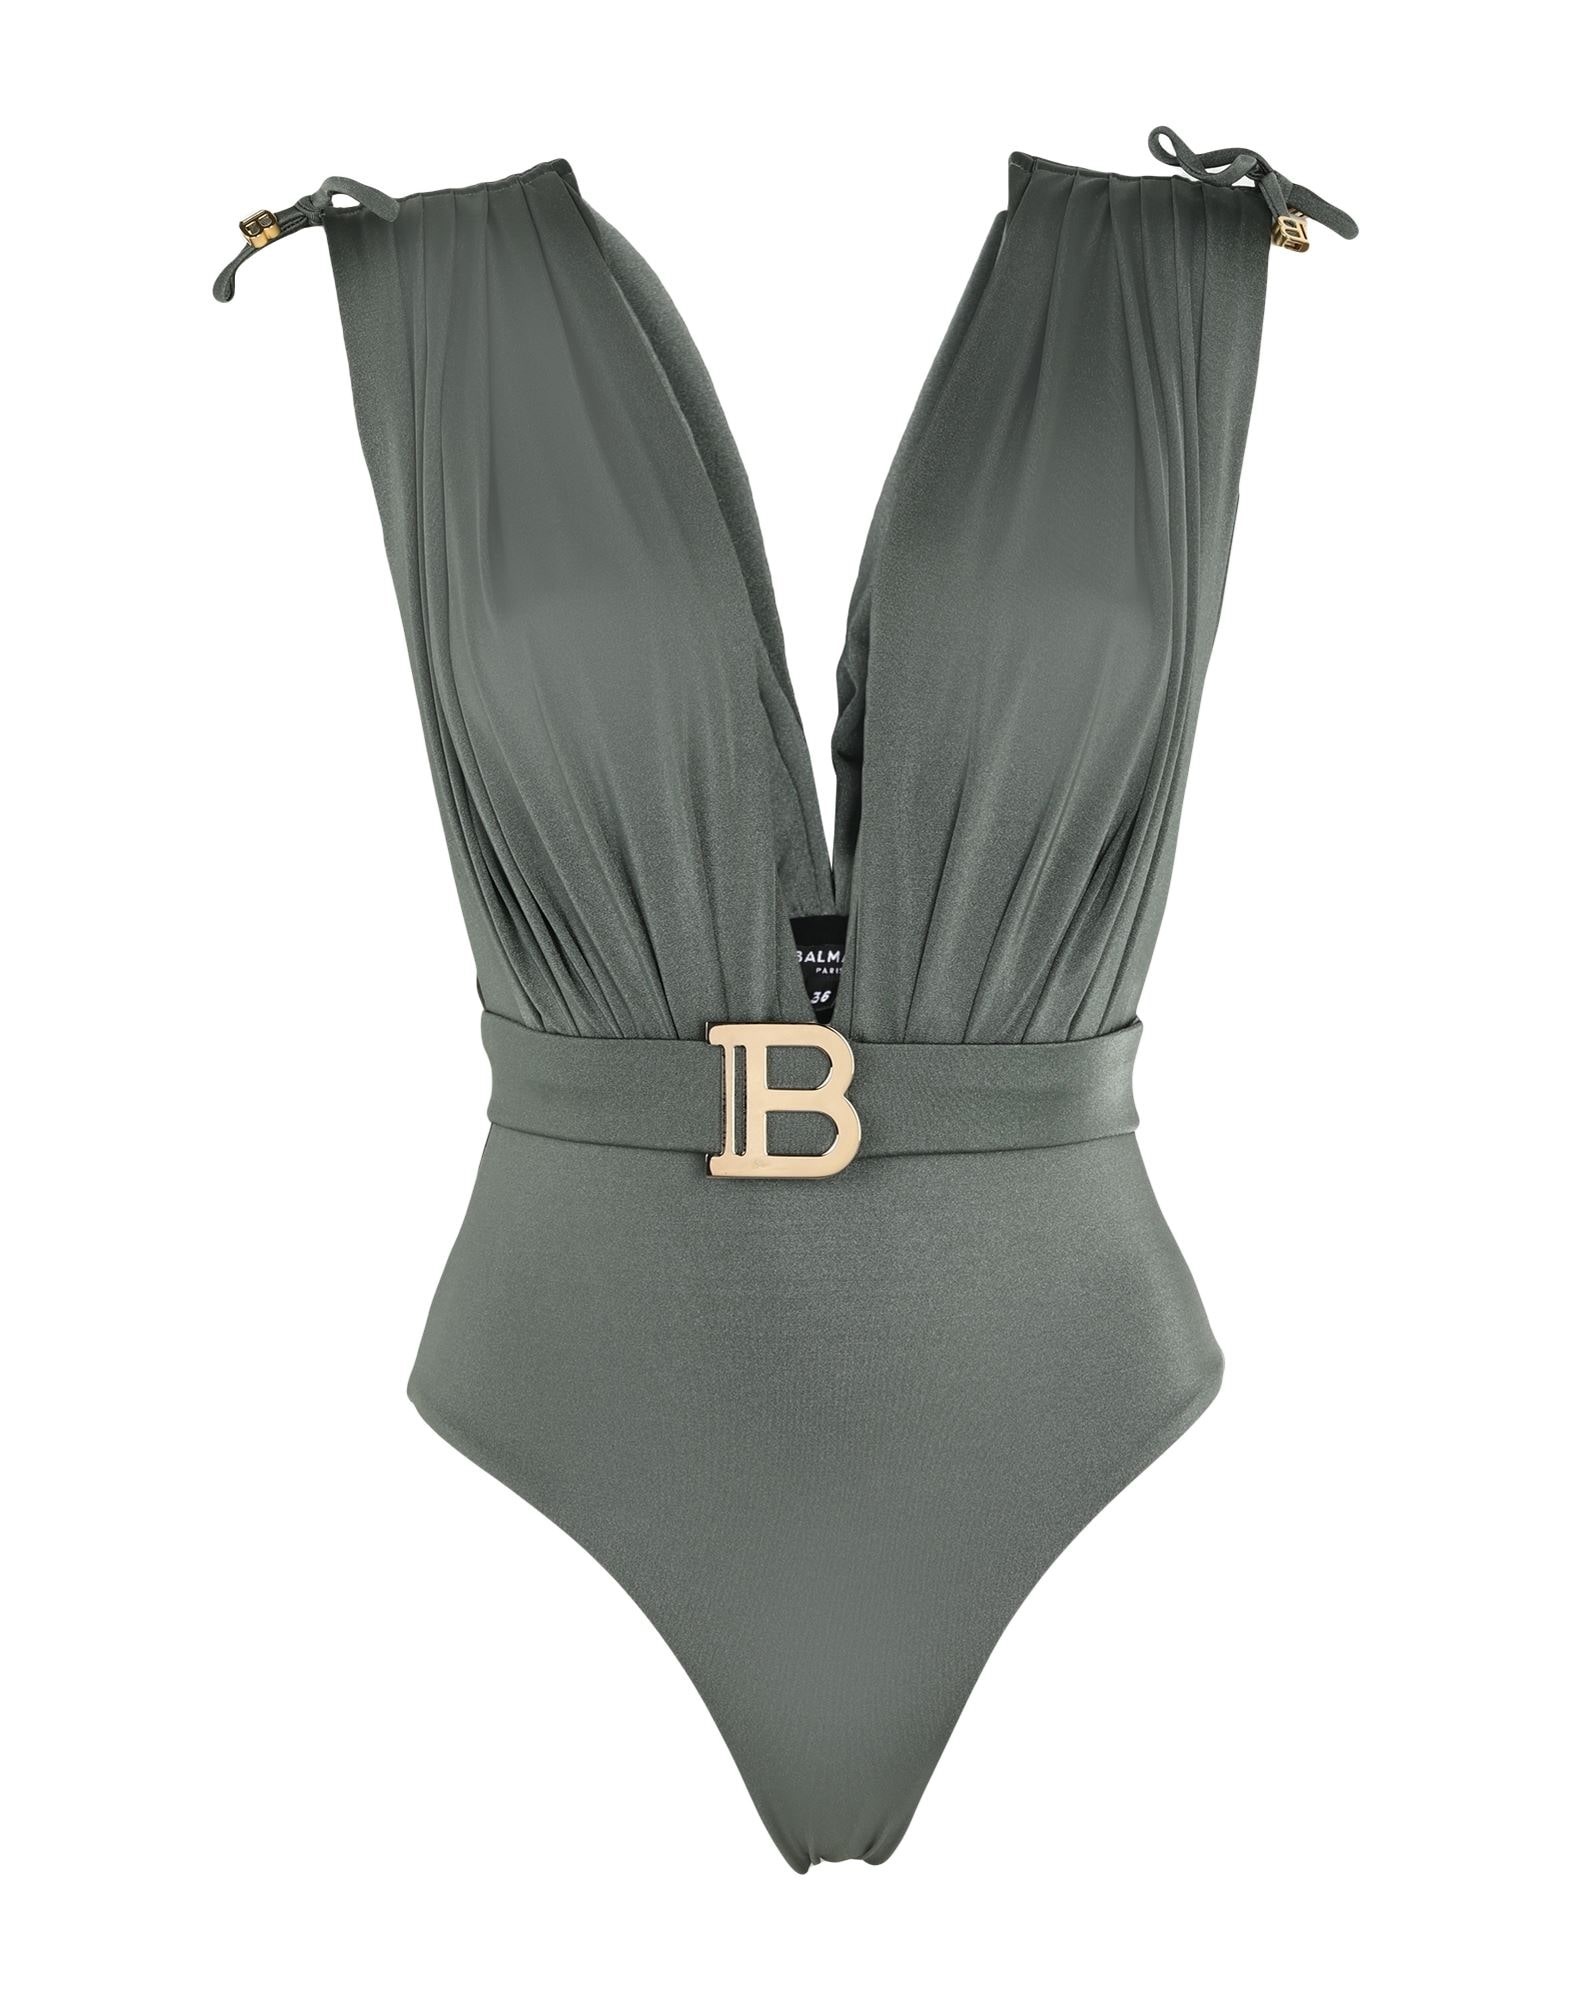 Sage green Women's One-piece Swimsuits - 1